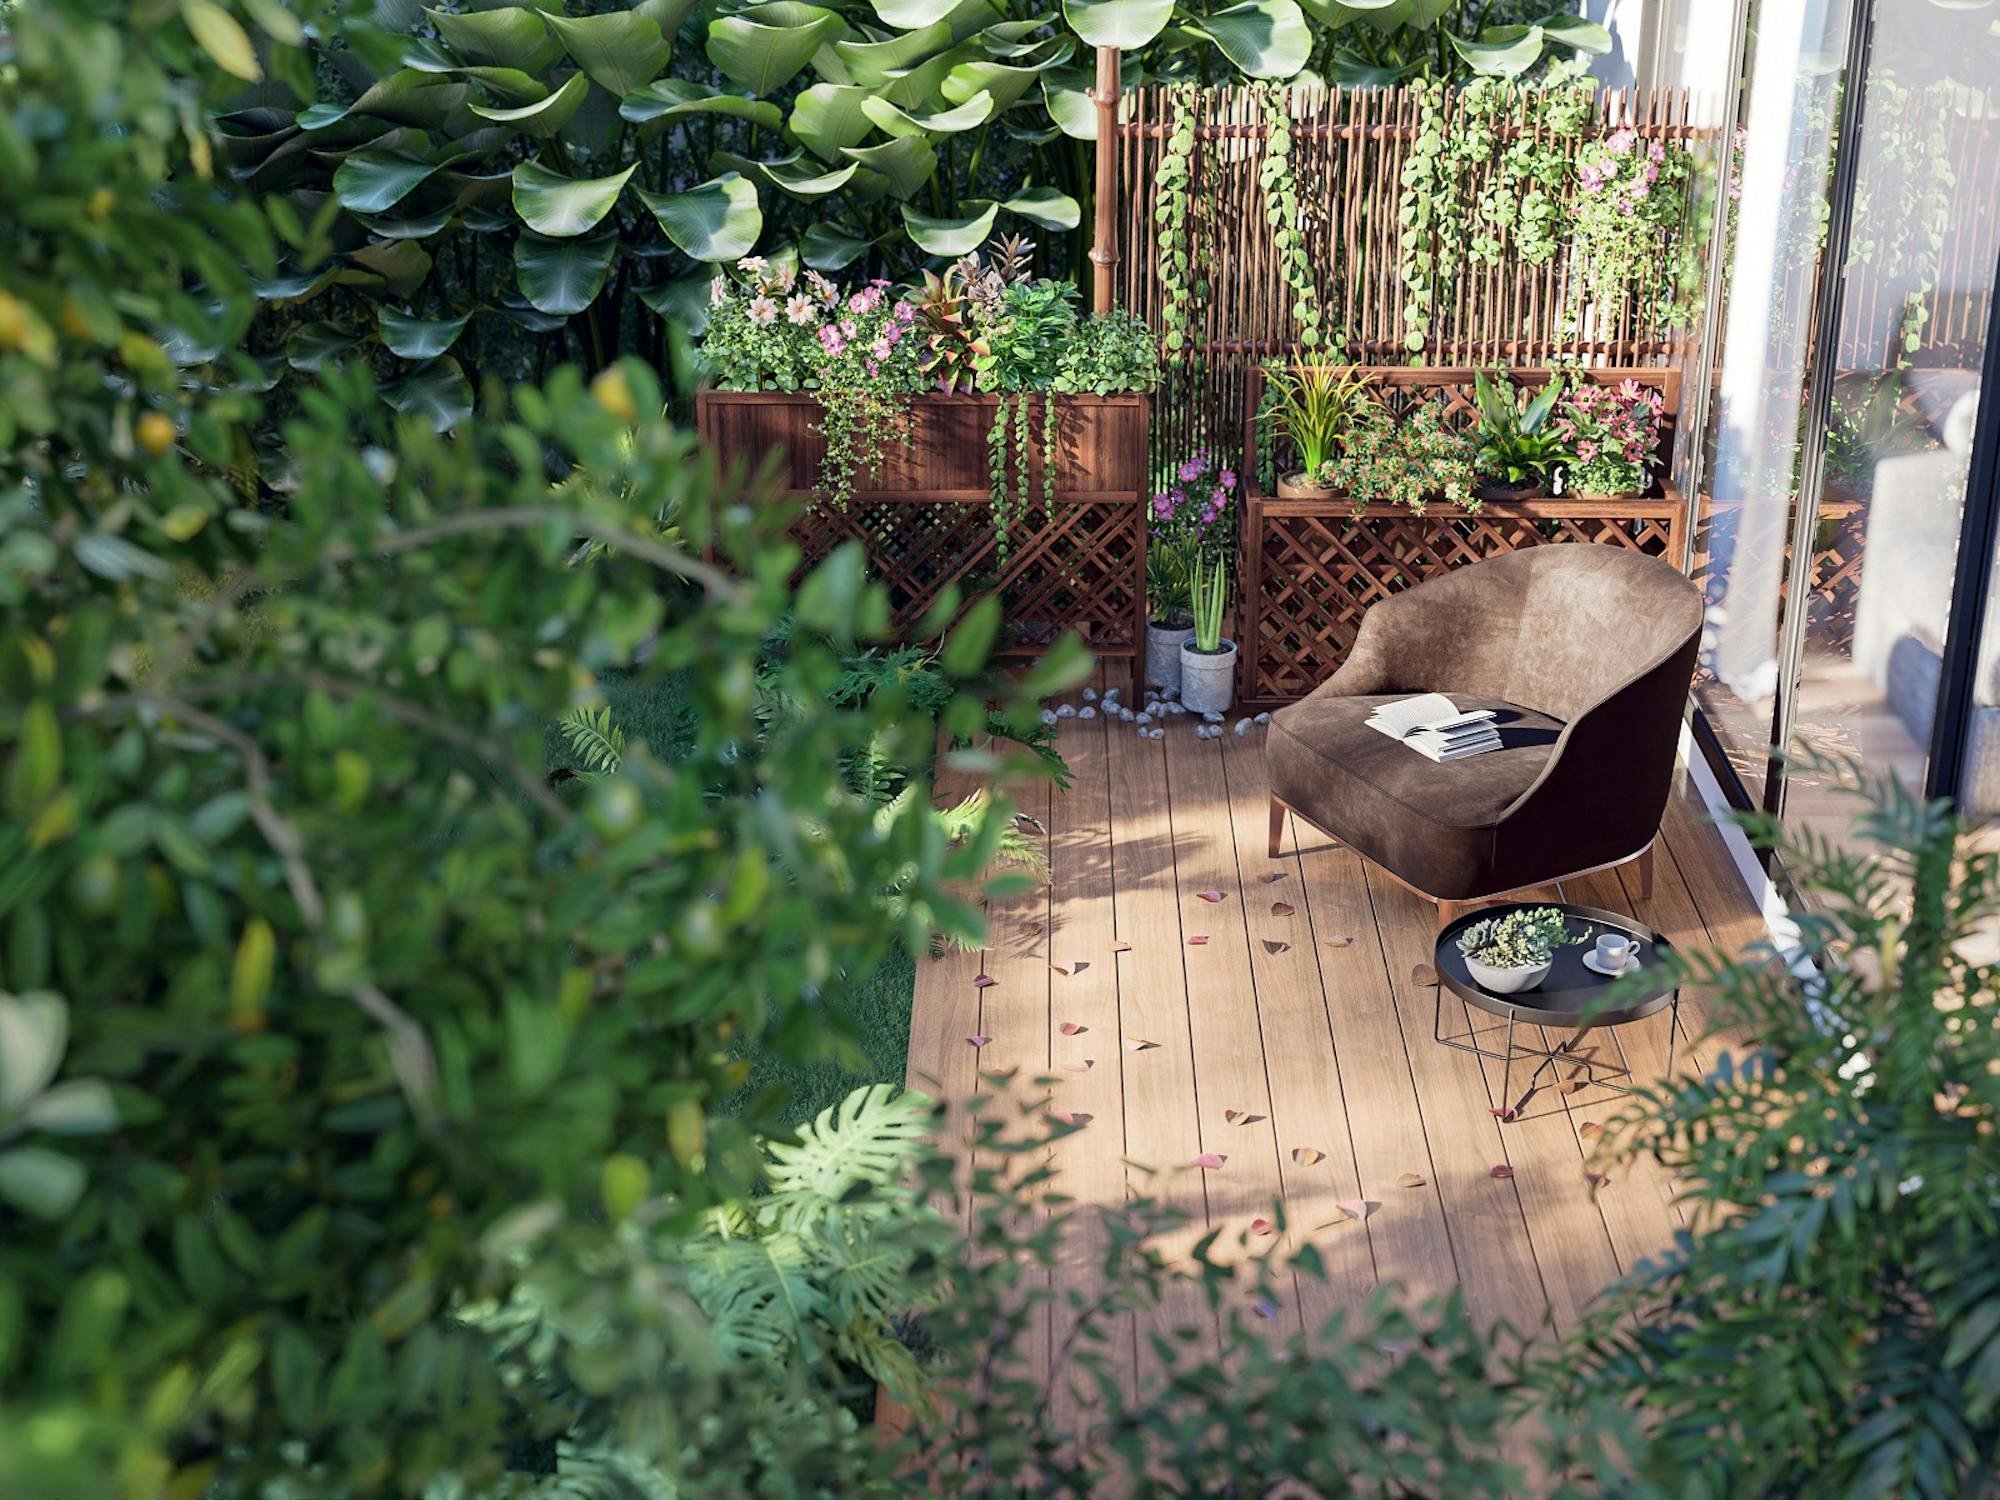 How to Start a Garden in a Small Space